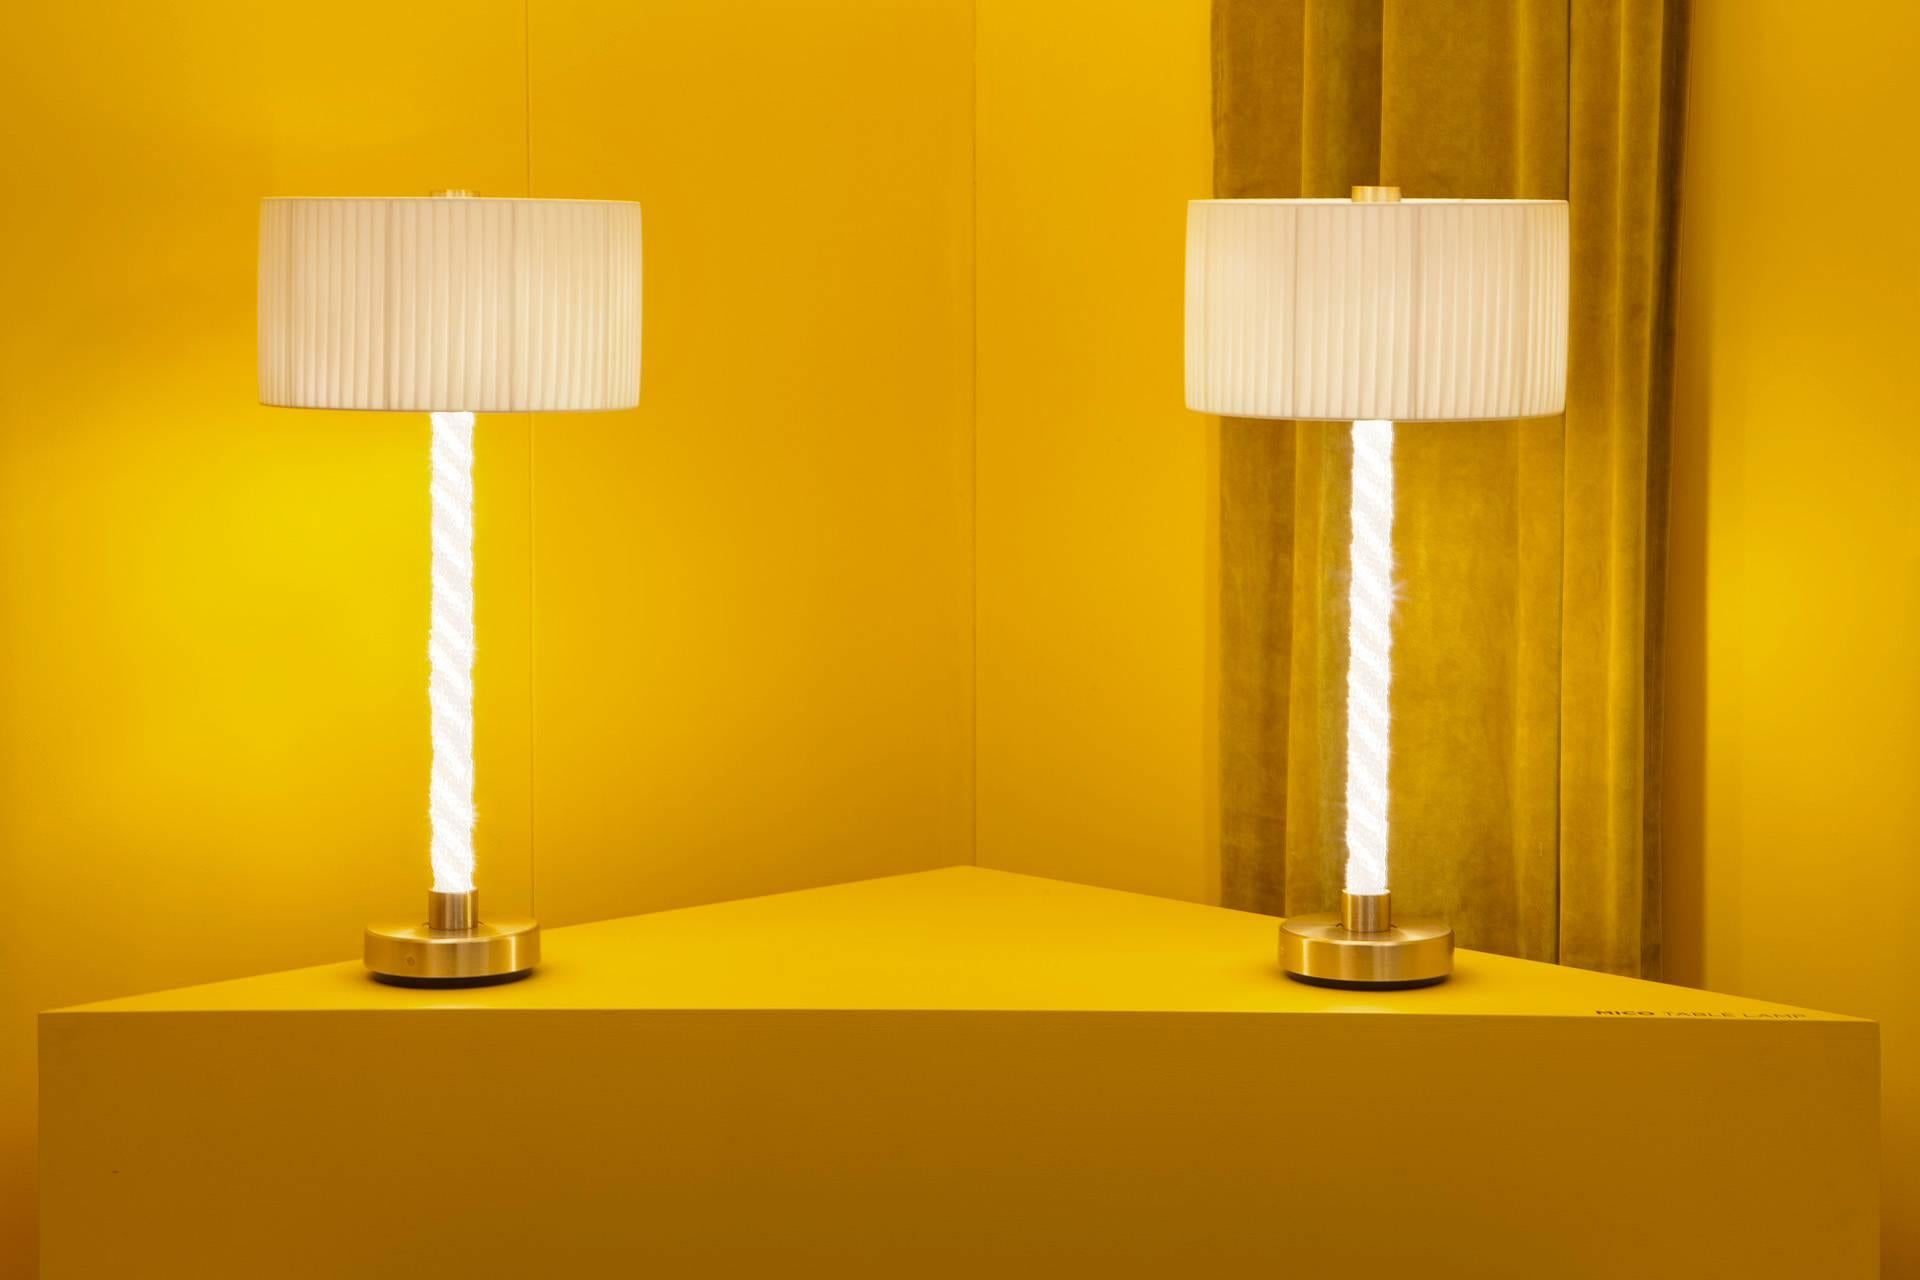 The Mico table lamp belongs to the Mico series that explores the concept and experience of pure light, personifying Baroncelli’s commitment to progressive design and exceptional craftsmanship. 

The framework is bound by strands of cristallo glass